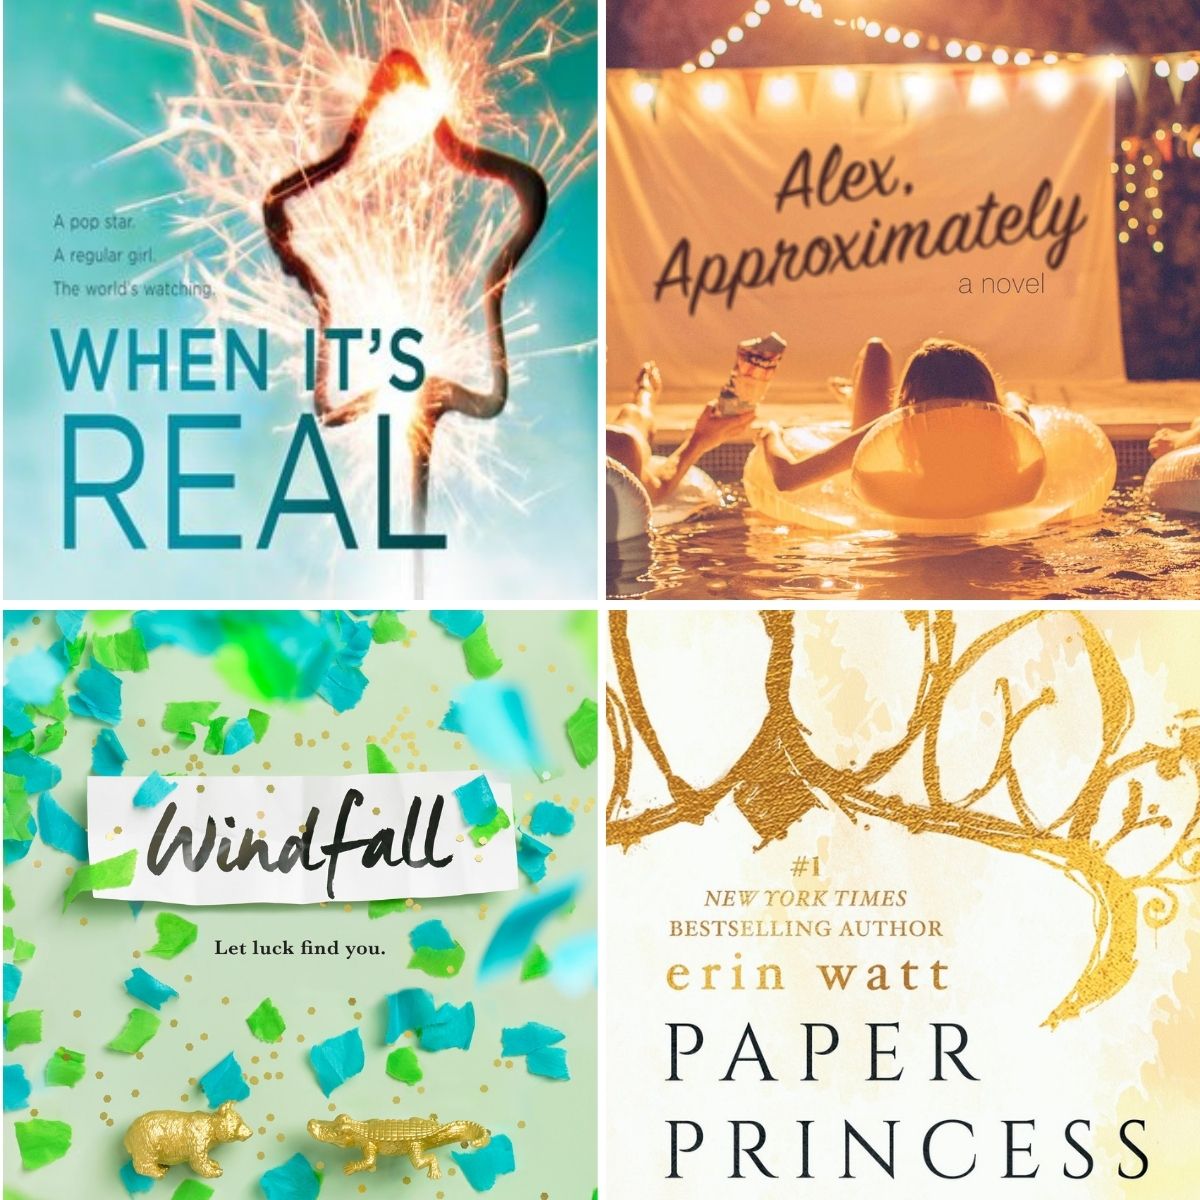 A collage of young adult book covers that are light and fun.